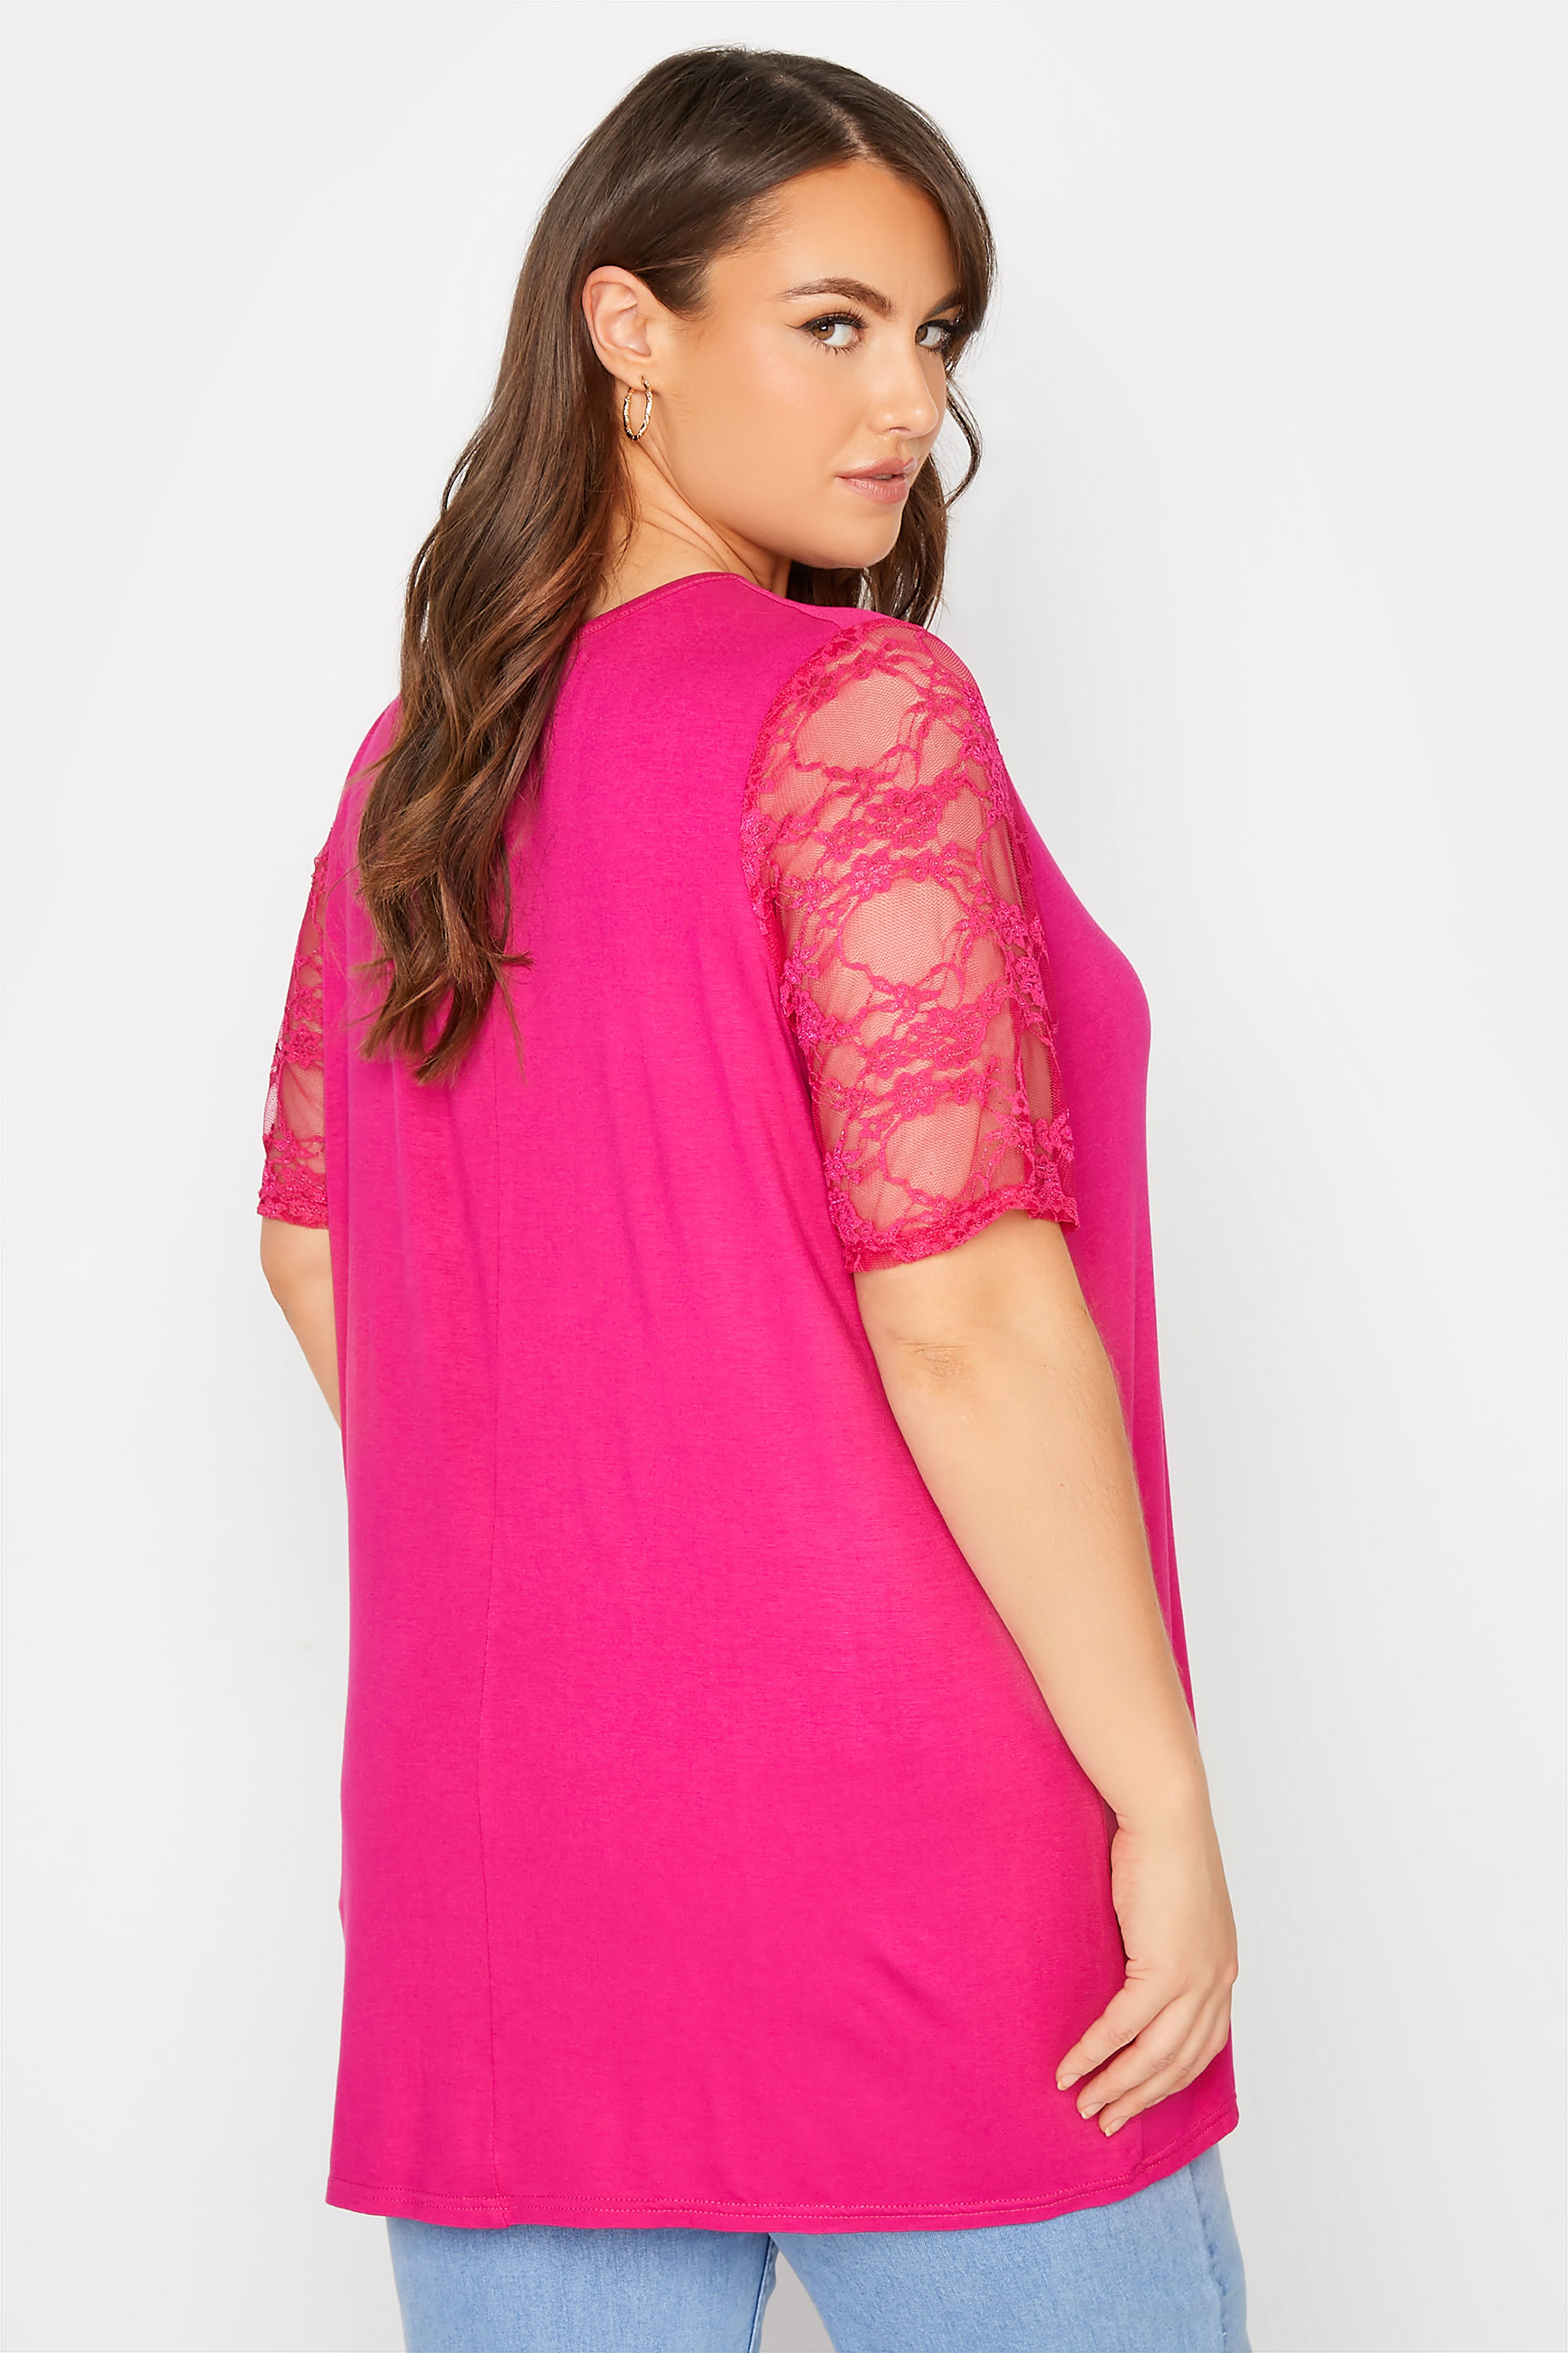 Grande taille  Tops Grande taille  Tops dentelle | LIMITED COLLECTION - Top Rose Bonbon Manches Courtes Dentelle - TB81272